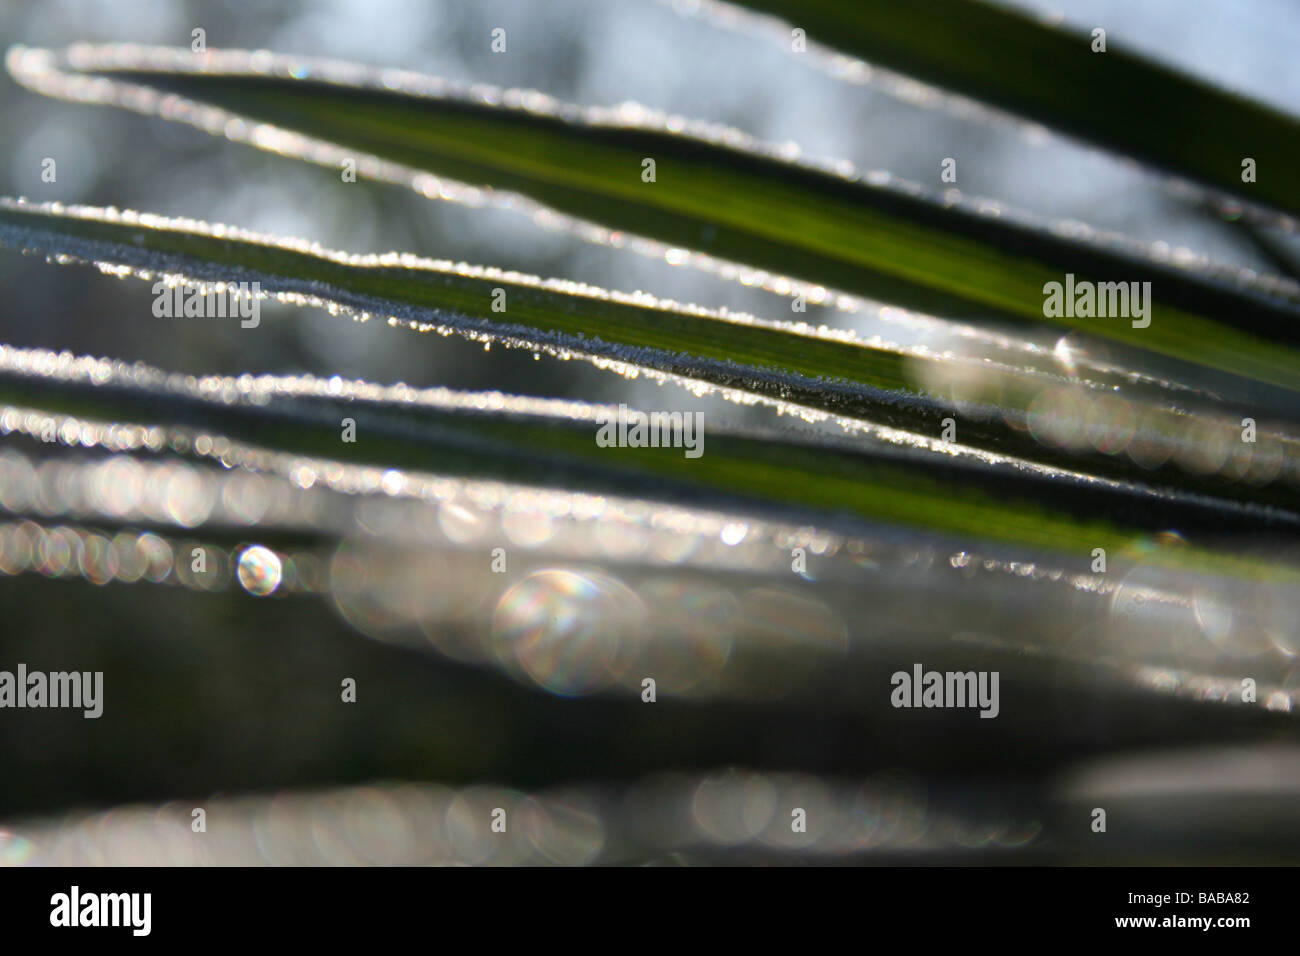 Trachycarpus fortunei / Chusan palm leaf with frost catching morning sunlight, dark background Stock Photo